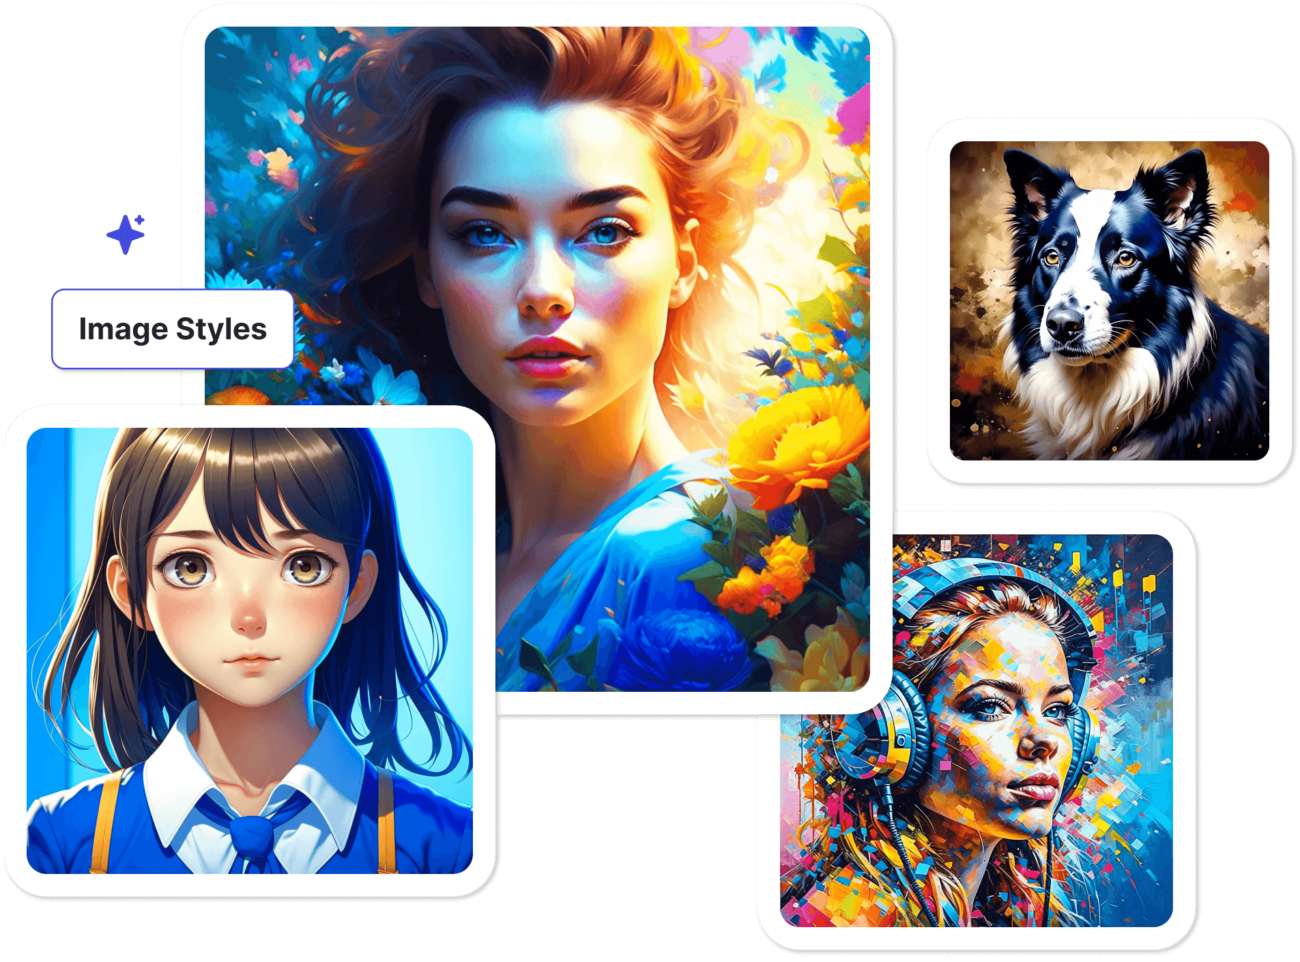 Collage of digital art styles featuring a woman surrounded by flowers, anime-style girl character, border collie dog, and woman with colorful headphones.